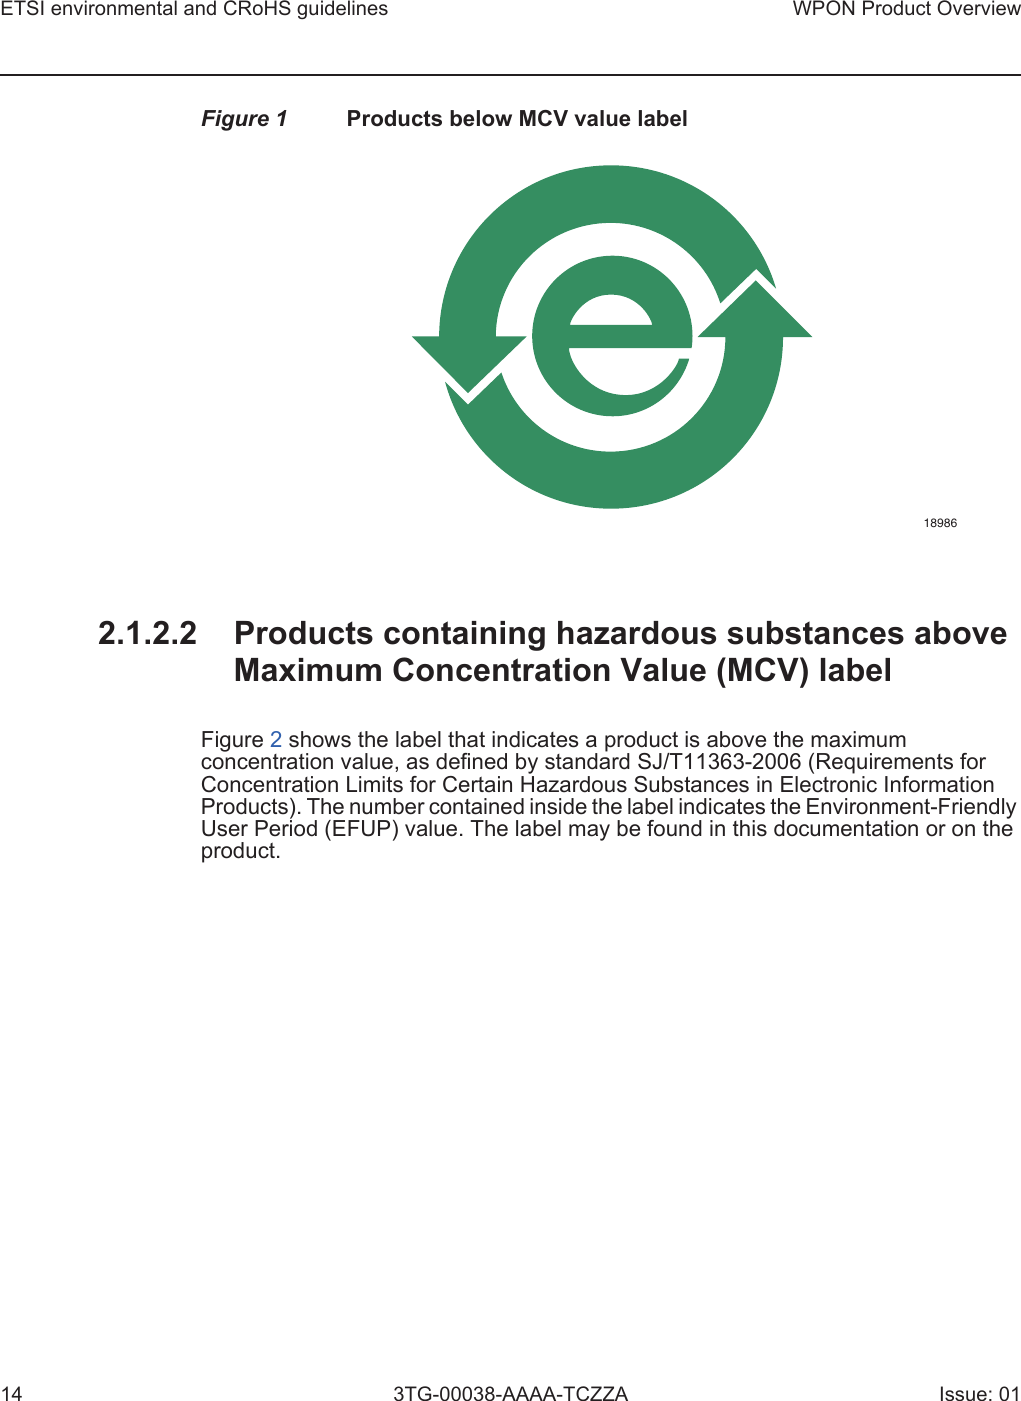 ETSI environmental and CRoHS guidelines14WPON Product Overview3TG-00038-AAAA-TCZZA Issue: 01Figure 1 Products below MCV value label2.1.2.2 Products containing hazardous substances above Maximum Concentration Value (MCV) labelFigure 2 shows the label that indicates a product is above the maximum concentration value, as defined by standard SJ/T11363-2006 (Requirements for Concentration Limits for Certain Hazardous Substances in Electronic Information Products). The number contained inside the label indicates the Environment-Friendly User Period (EFUP) value. The label may be found in this documentation or on the product.18986